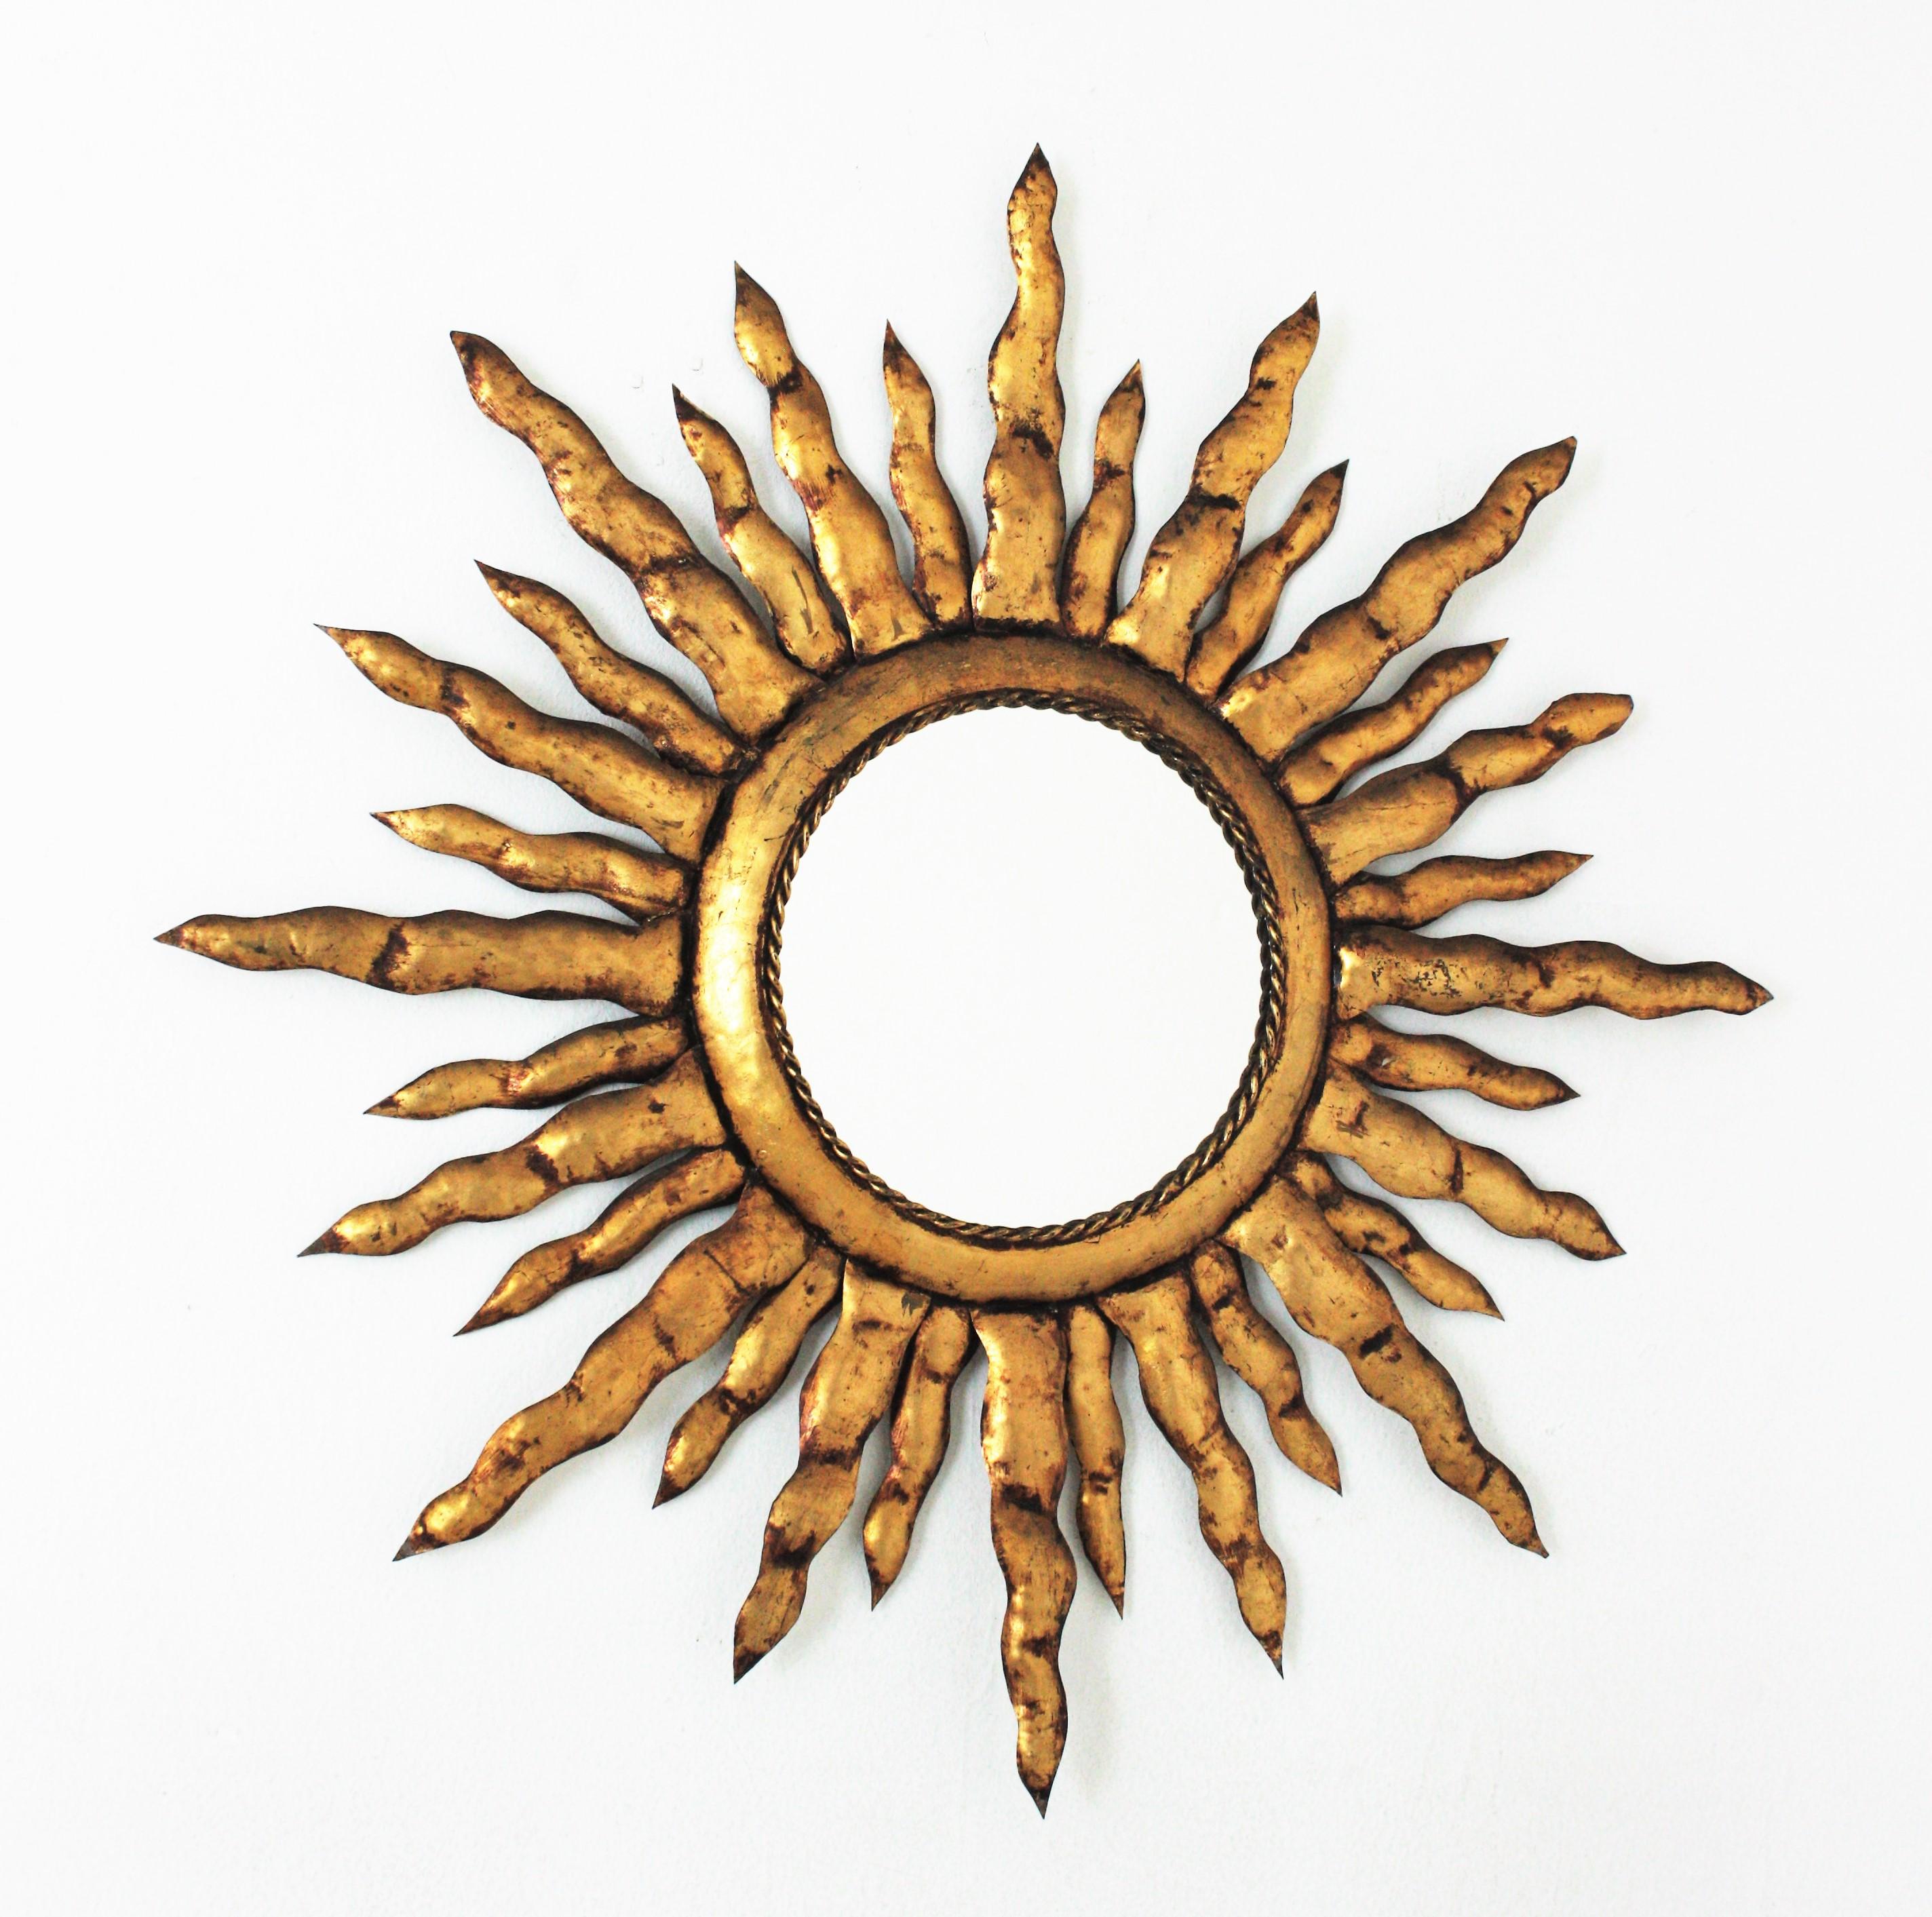 Handcrafted large sunburst mirror, gold leaf, gilt iron. France, 1950s.
This gilt metal sunburst miror has alternating rays in two sizes surrounding the central sphere.
This Brutalist sunburst was entirely made with hand forged iron and gilded